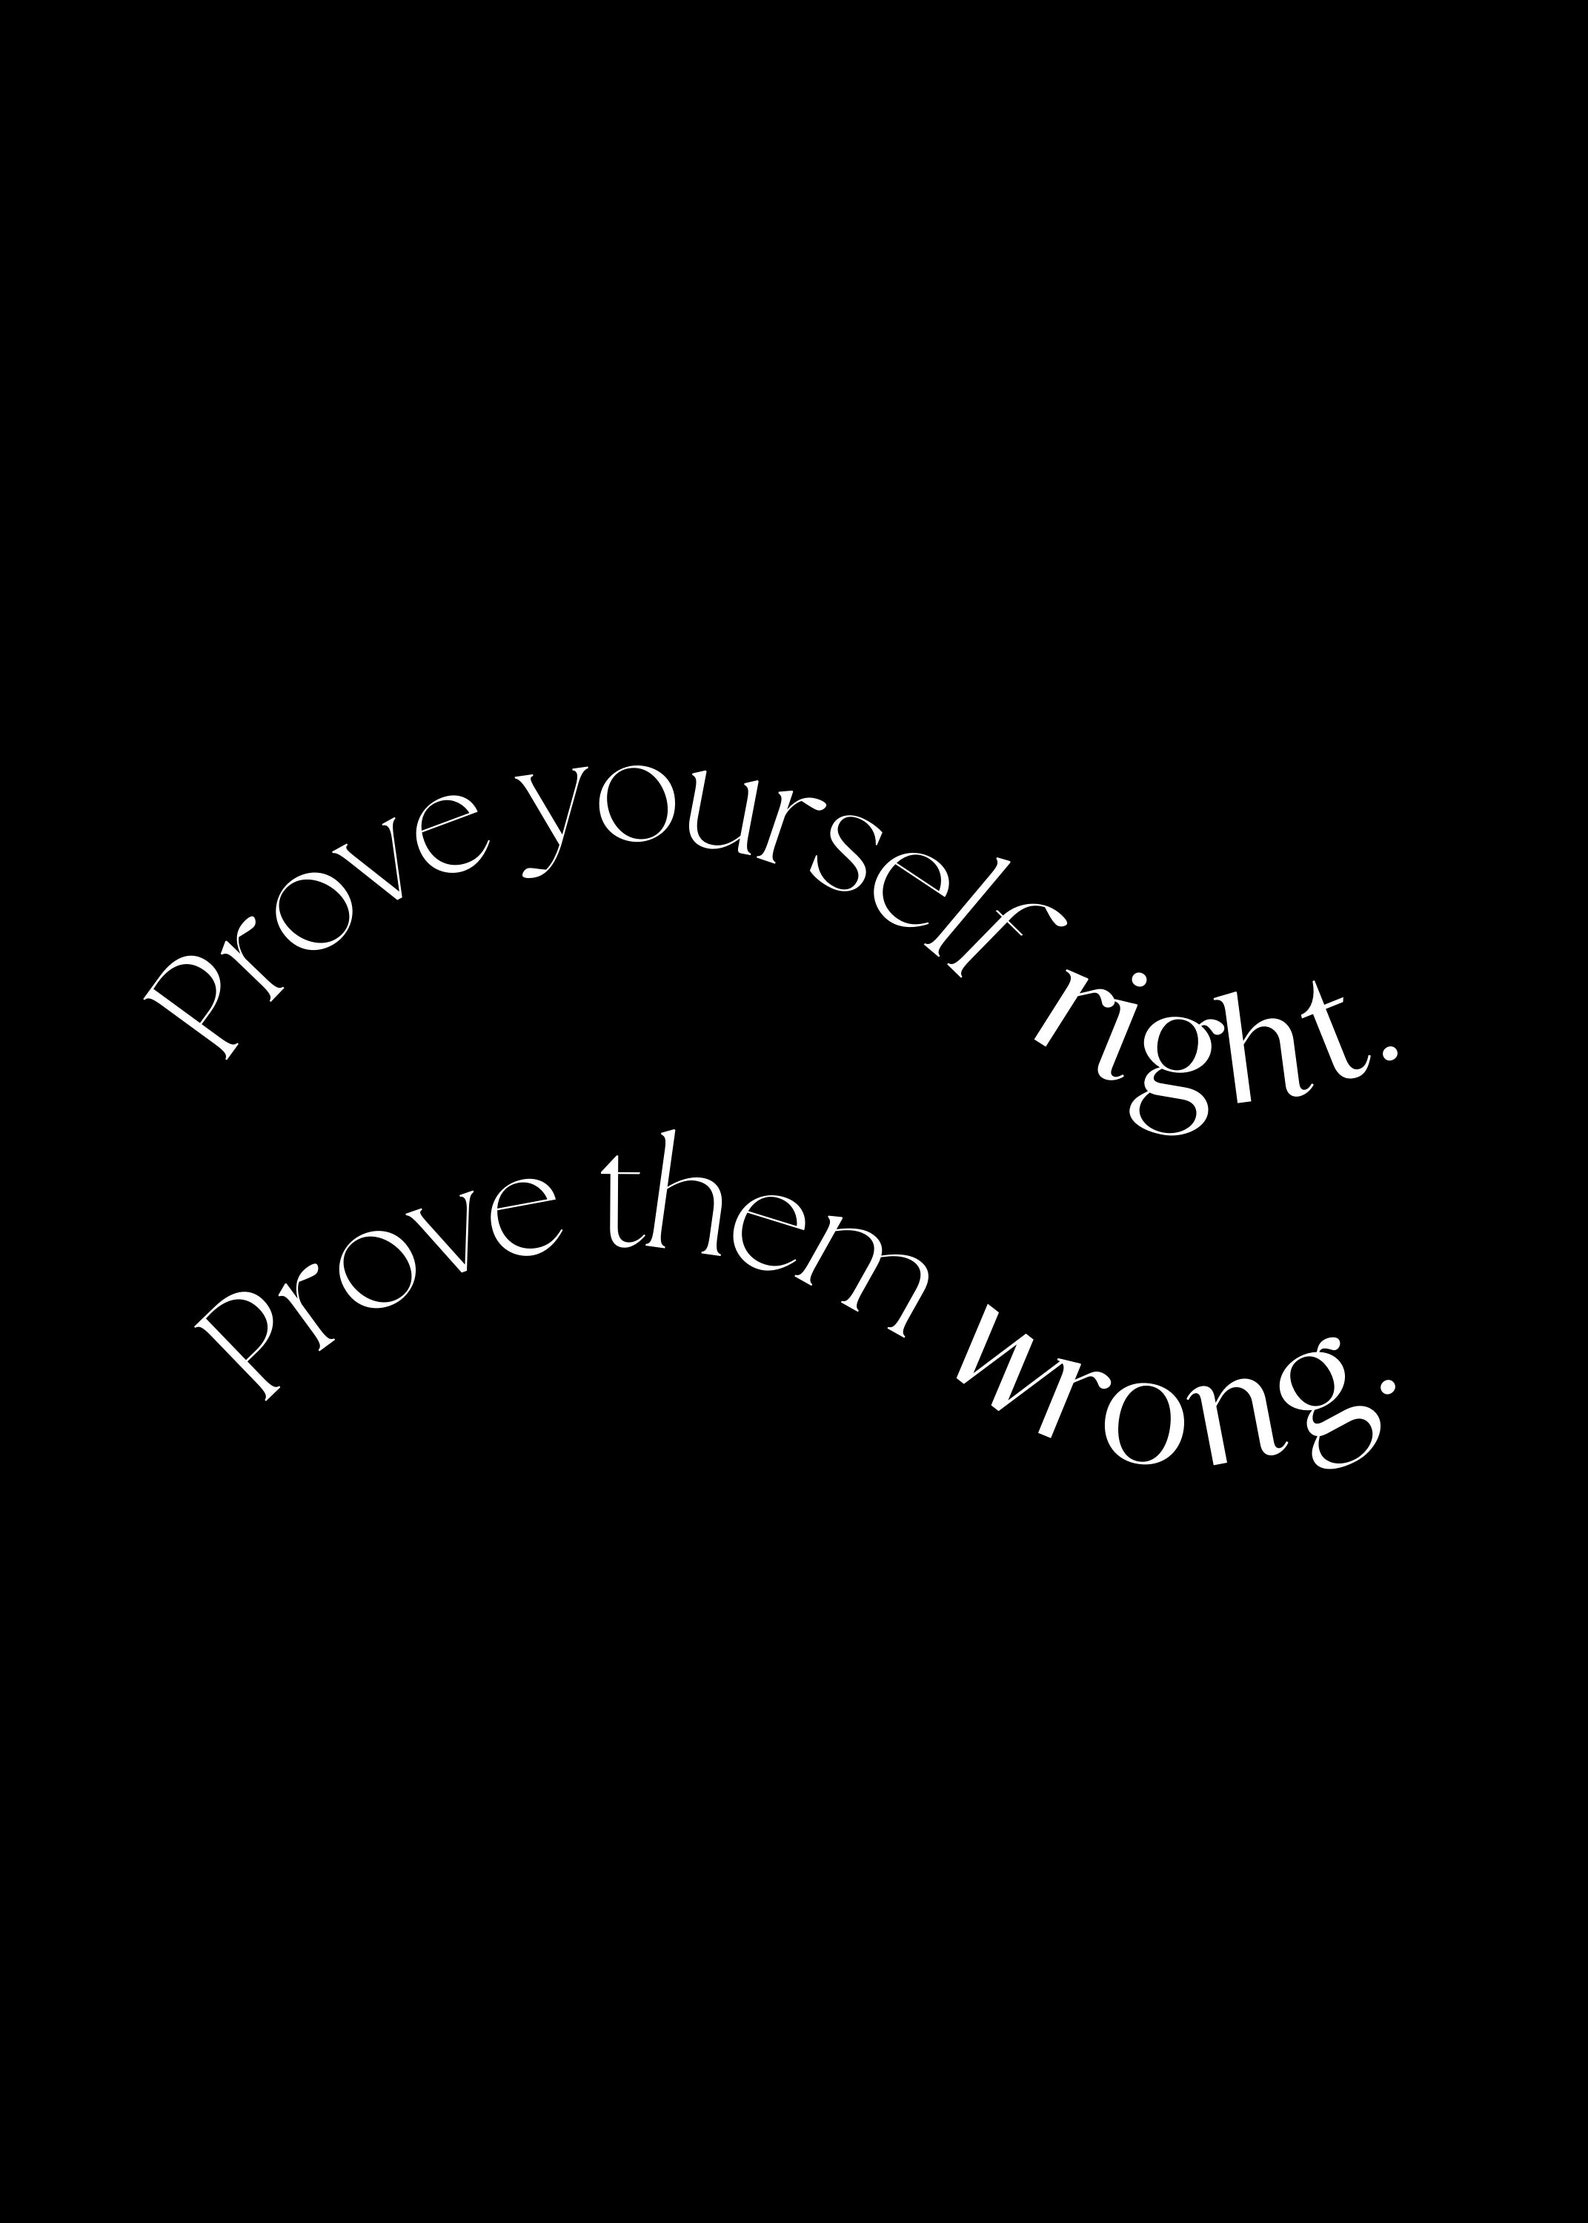 Prove Yourself RIGHT Printable Home Decor Inspirational | Etsy